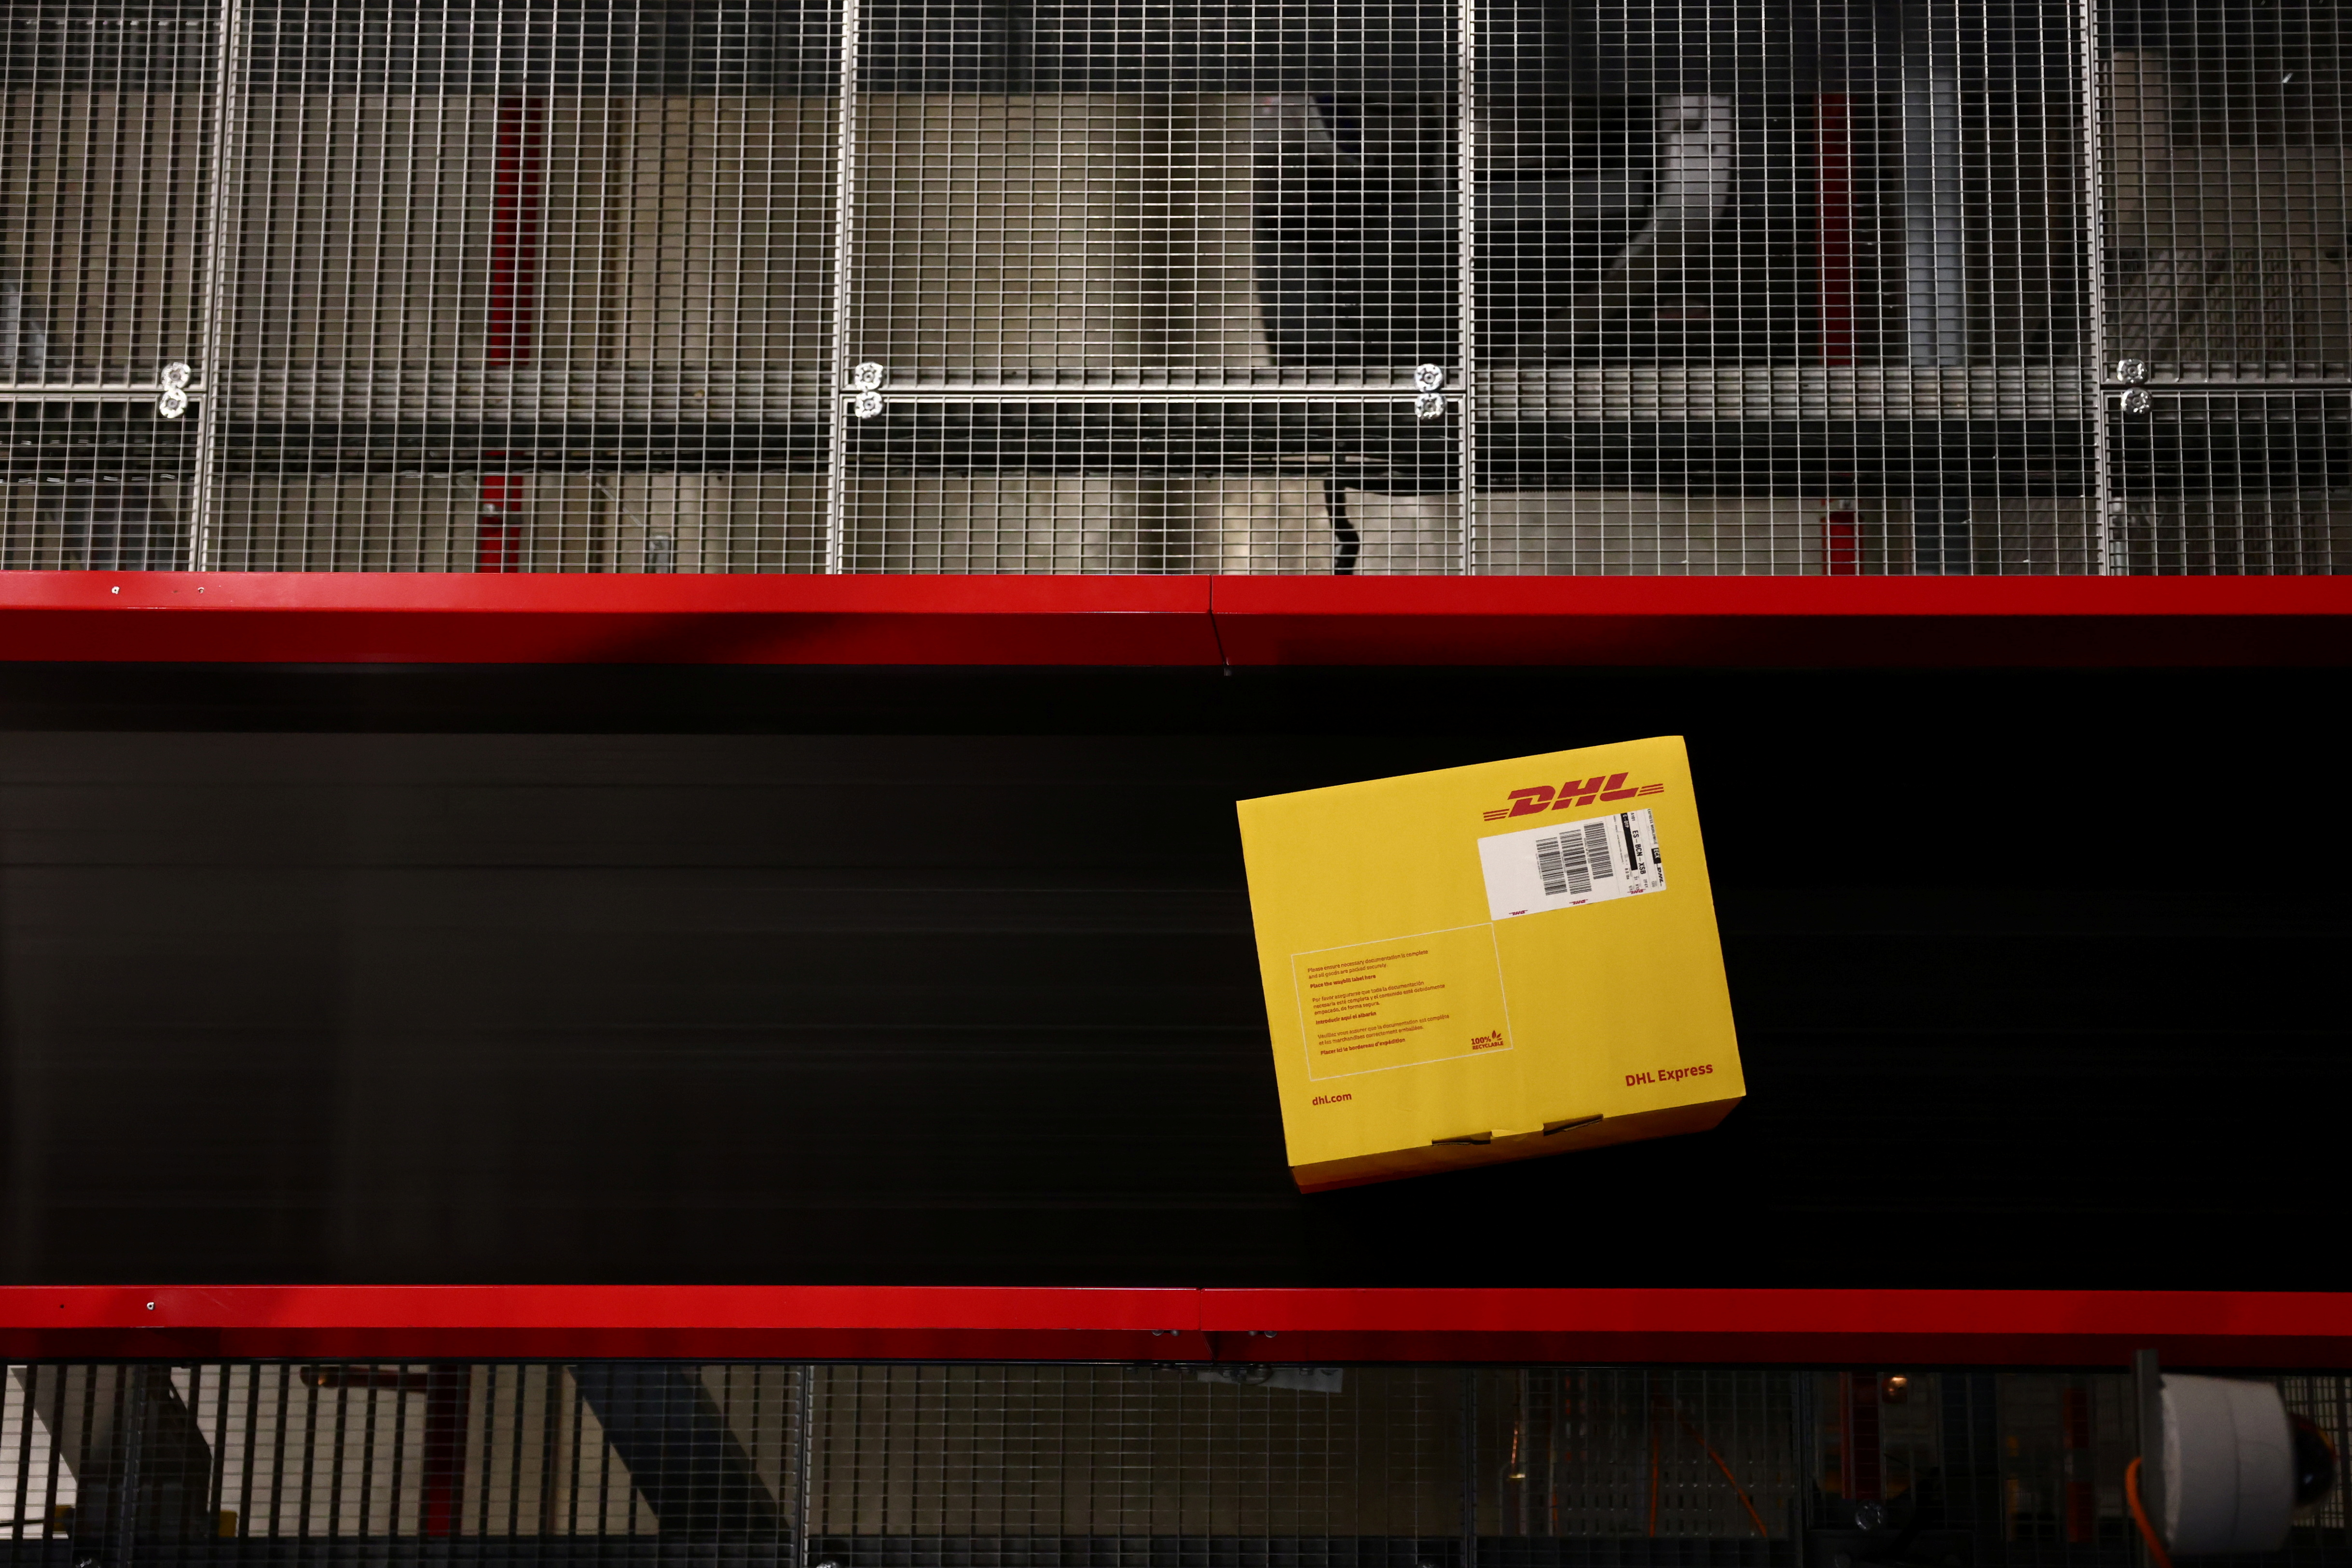 A DHL delivery package is seen in the new DHL Express hub near Paris